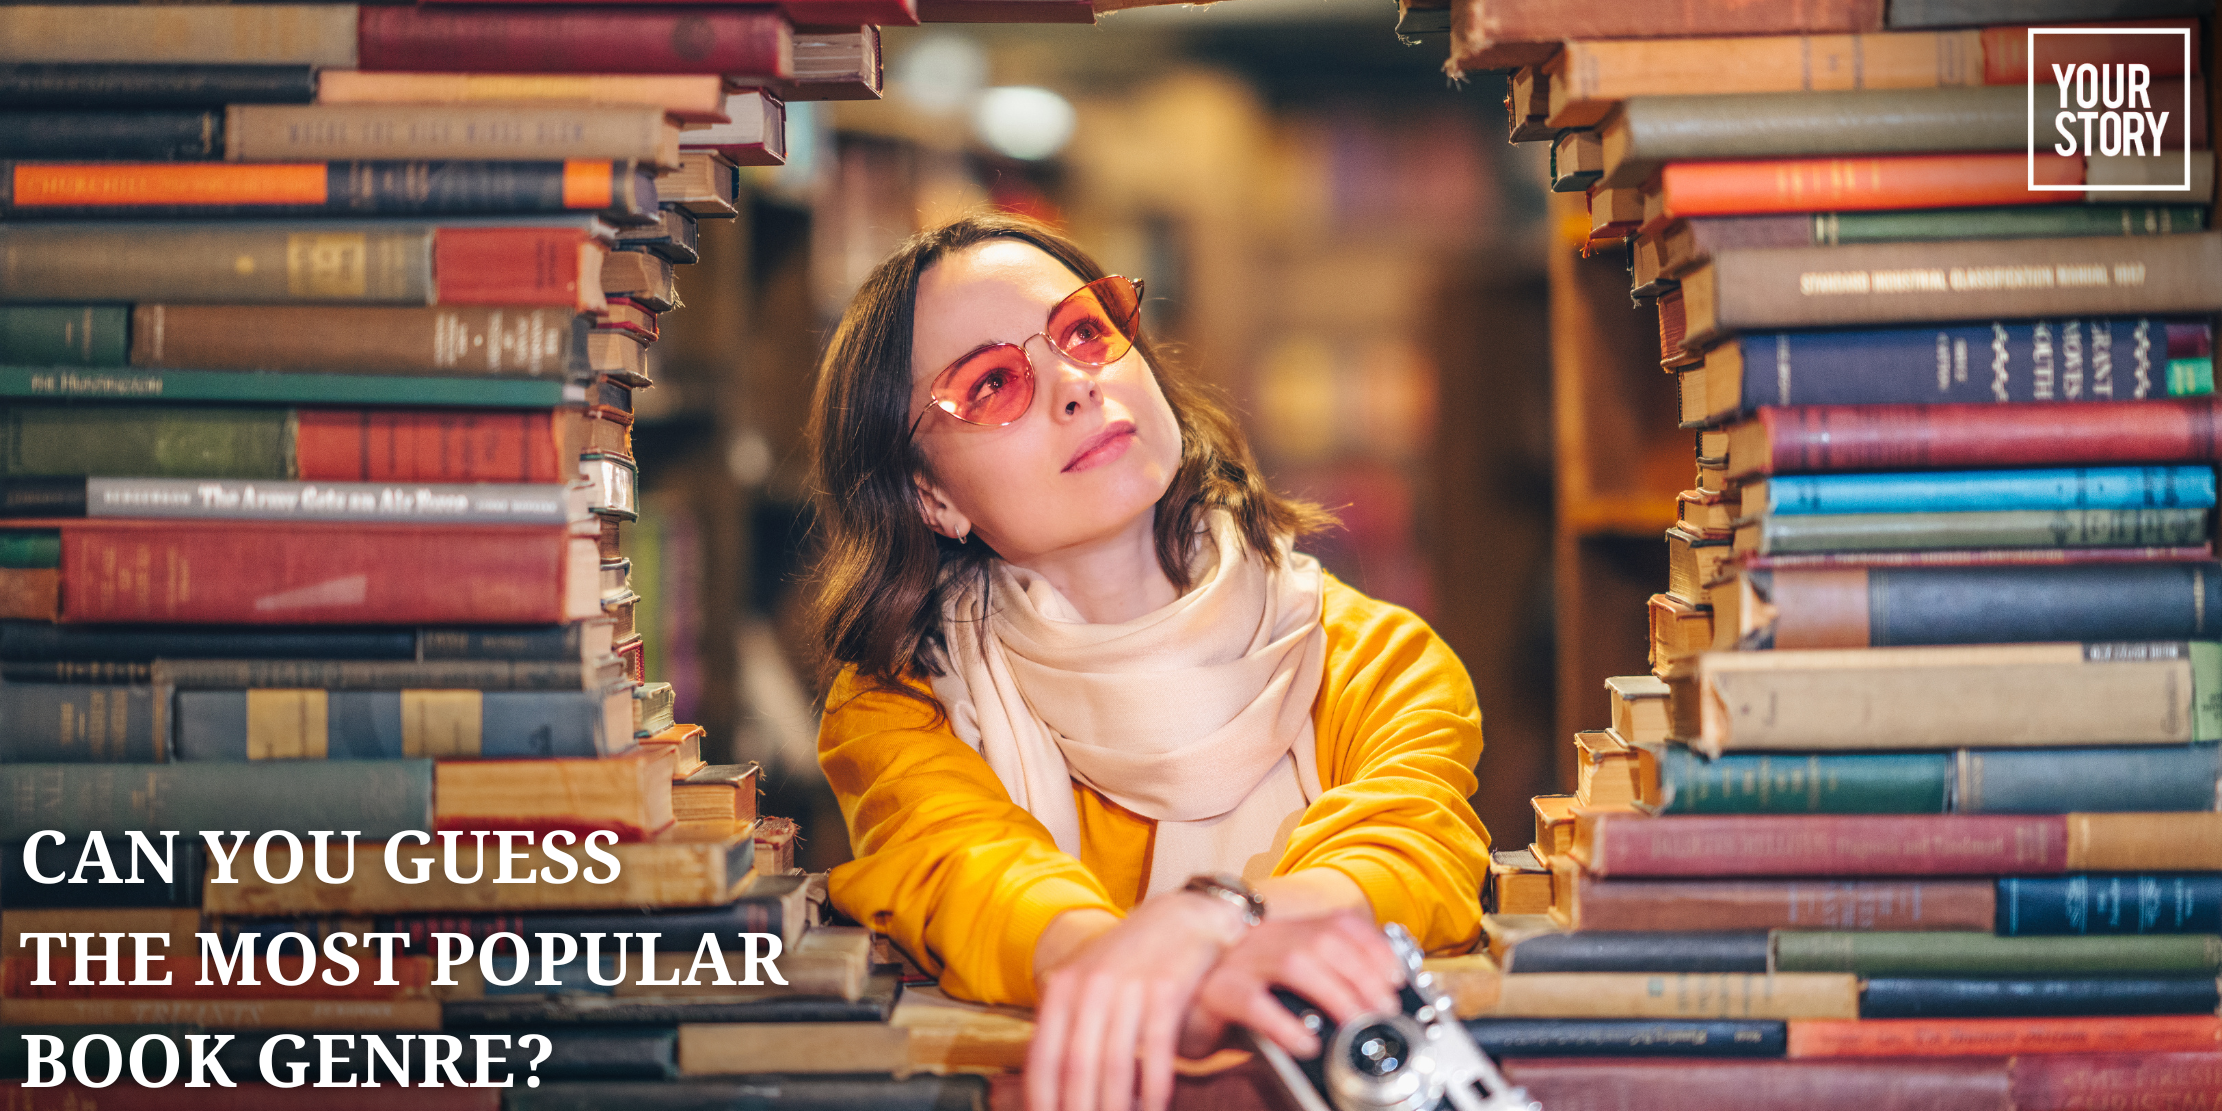 Can You Guess the Most Popular Book Genre?